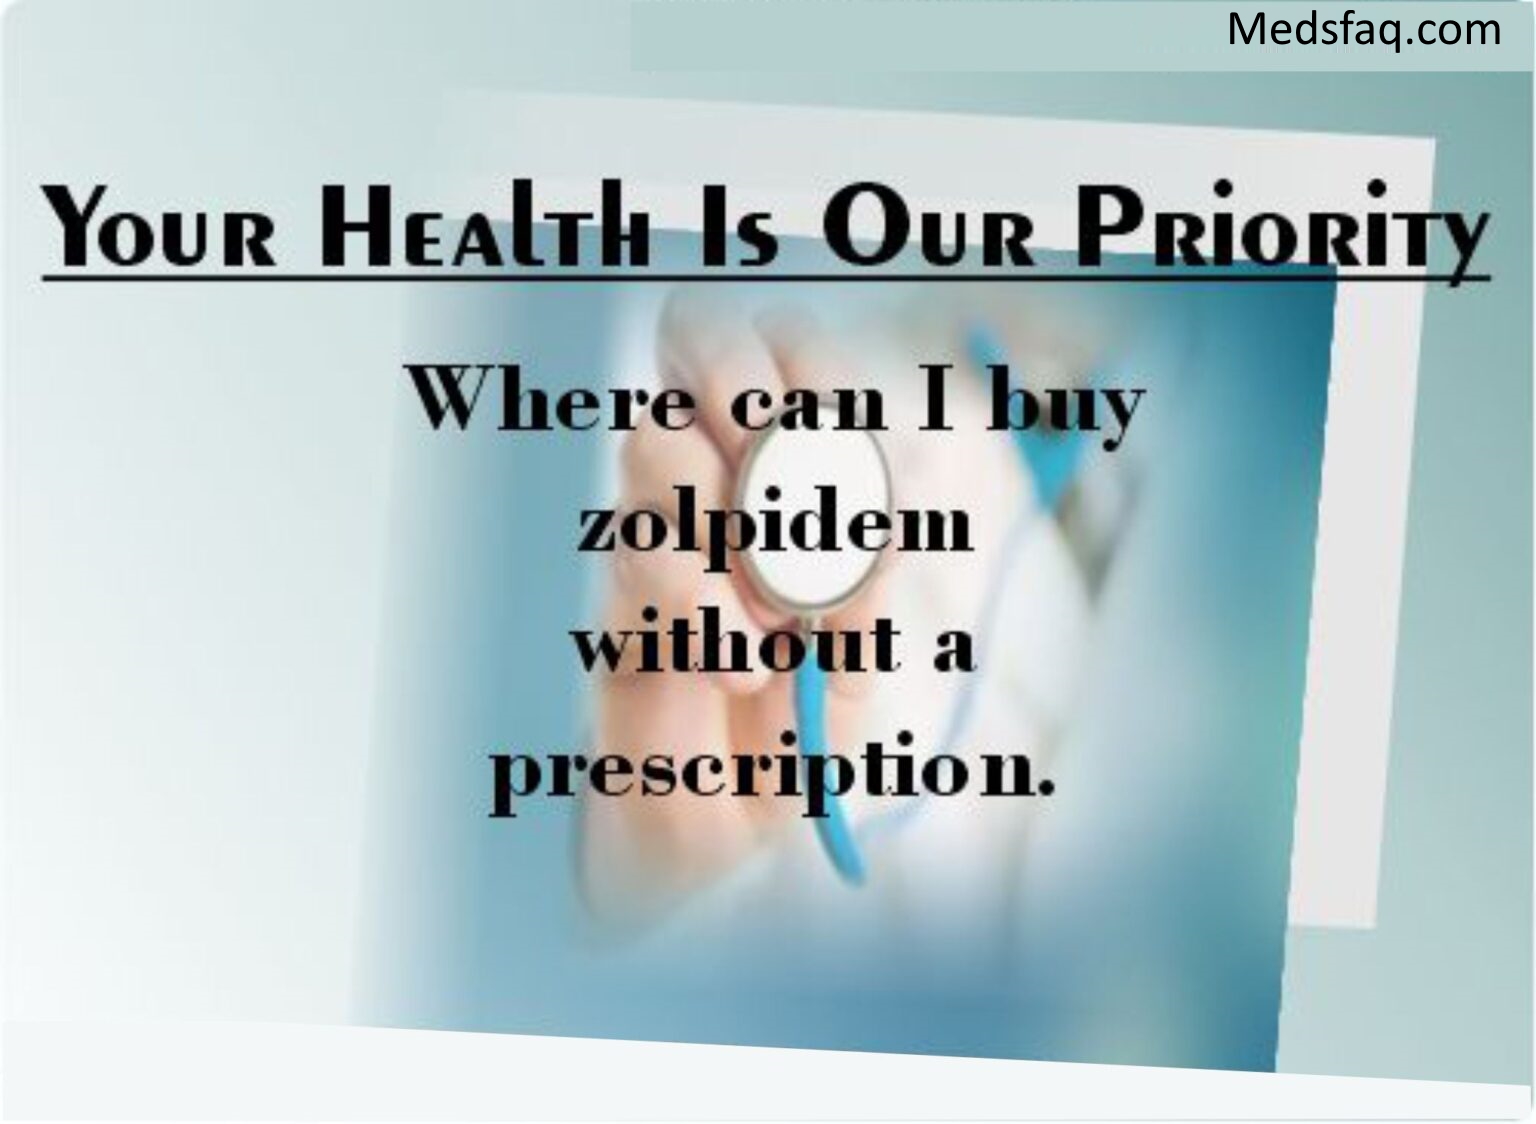 Where Can I Buy Zolpidem